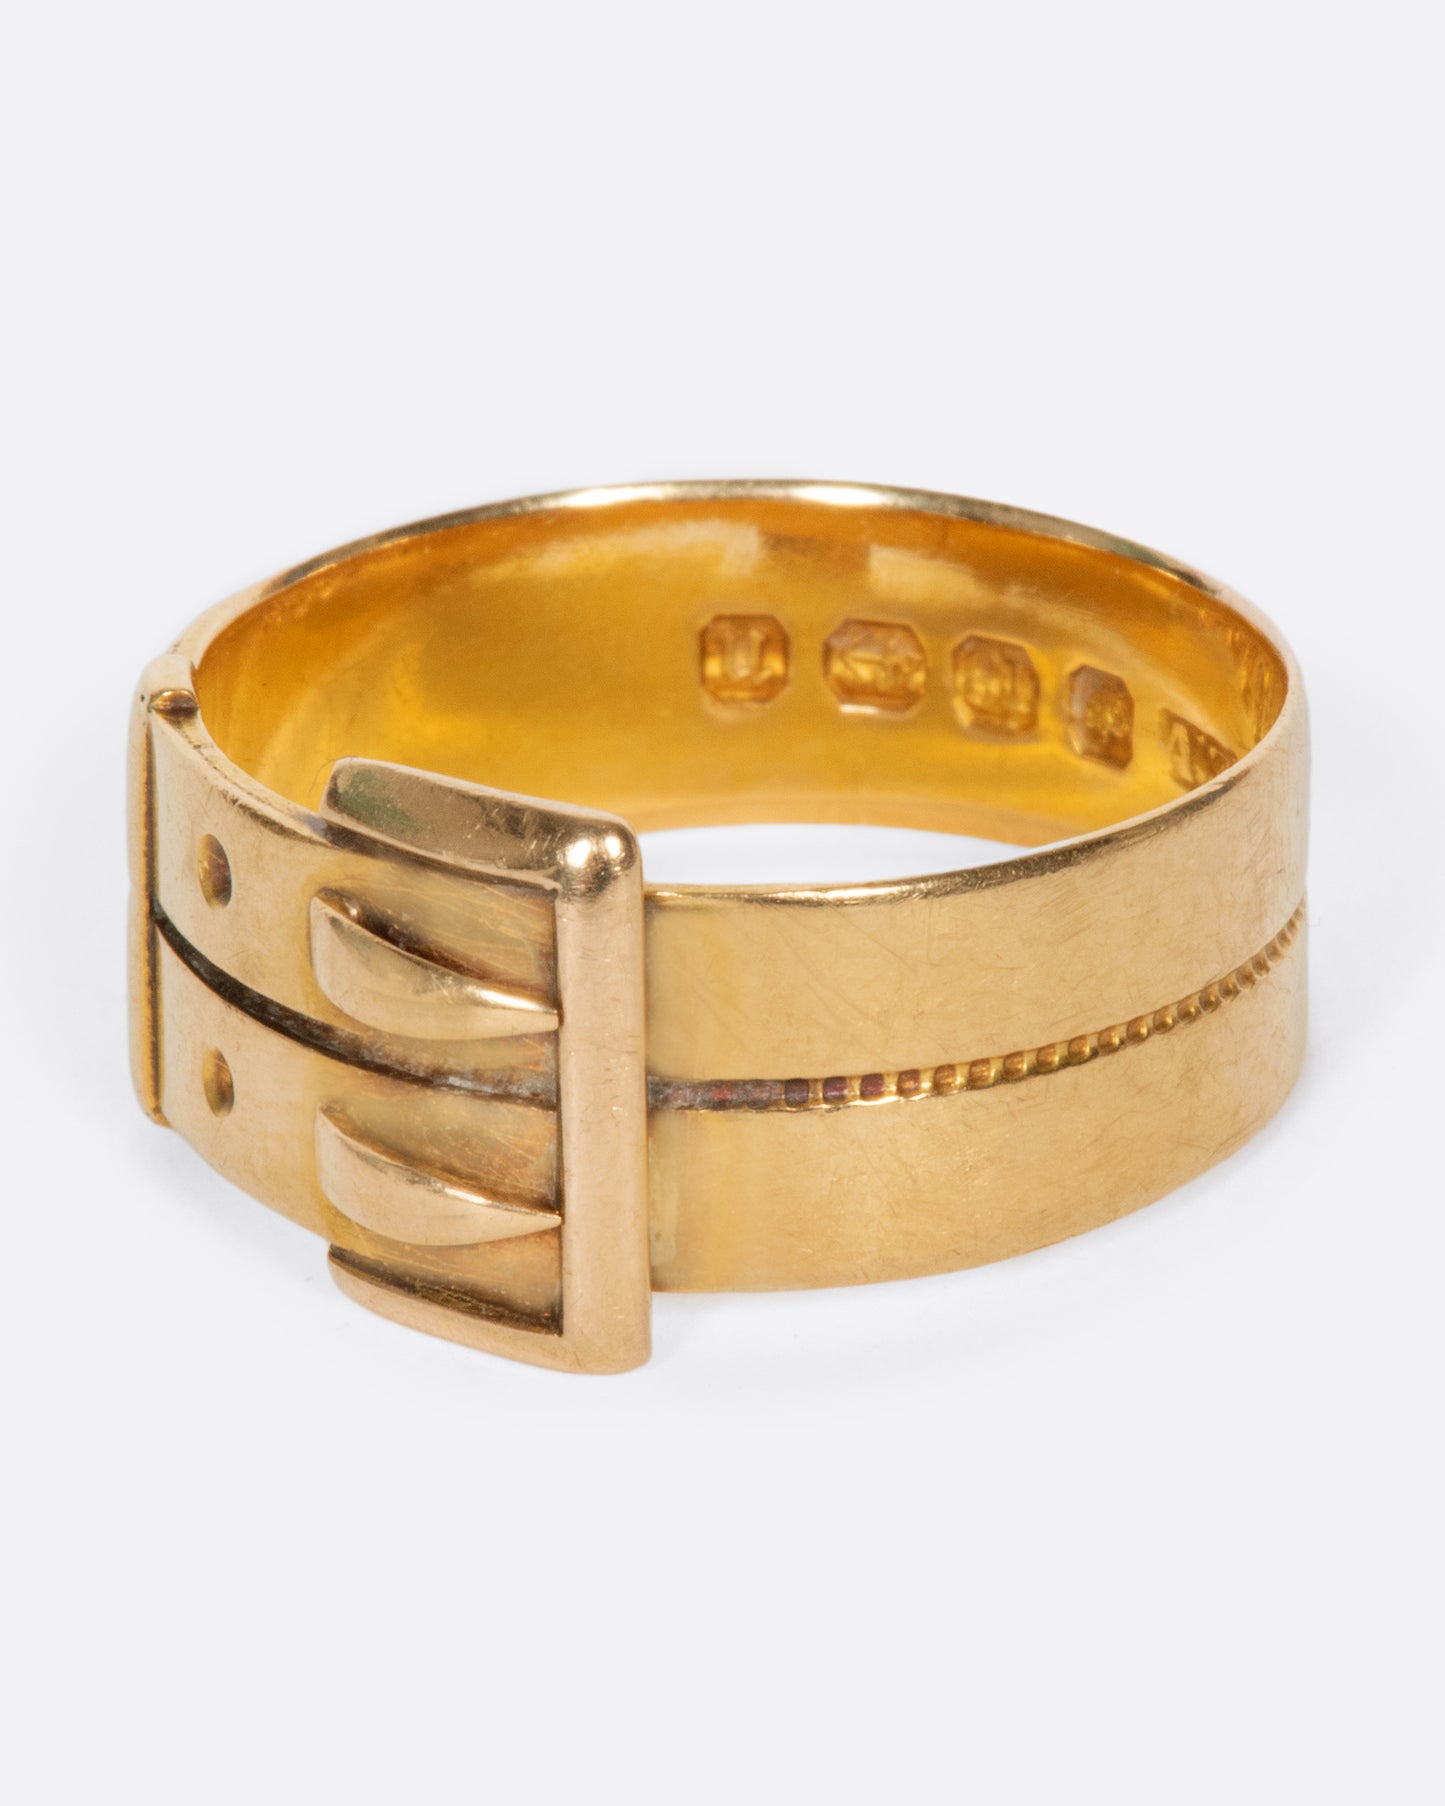 A vintage yellow gold belt buckle ring with two buckles.